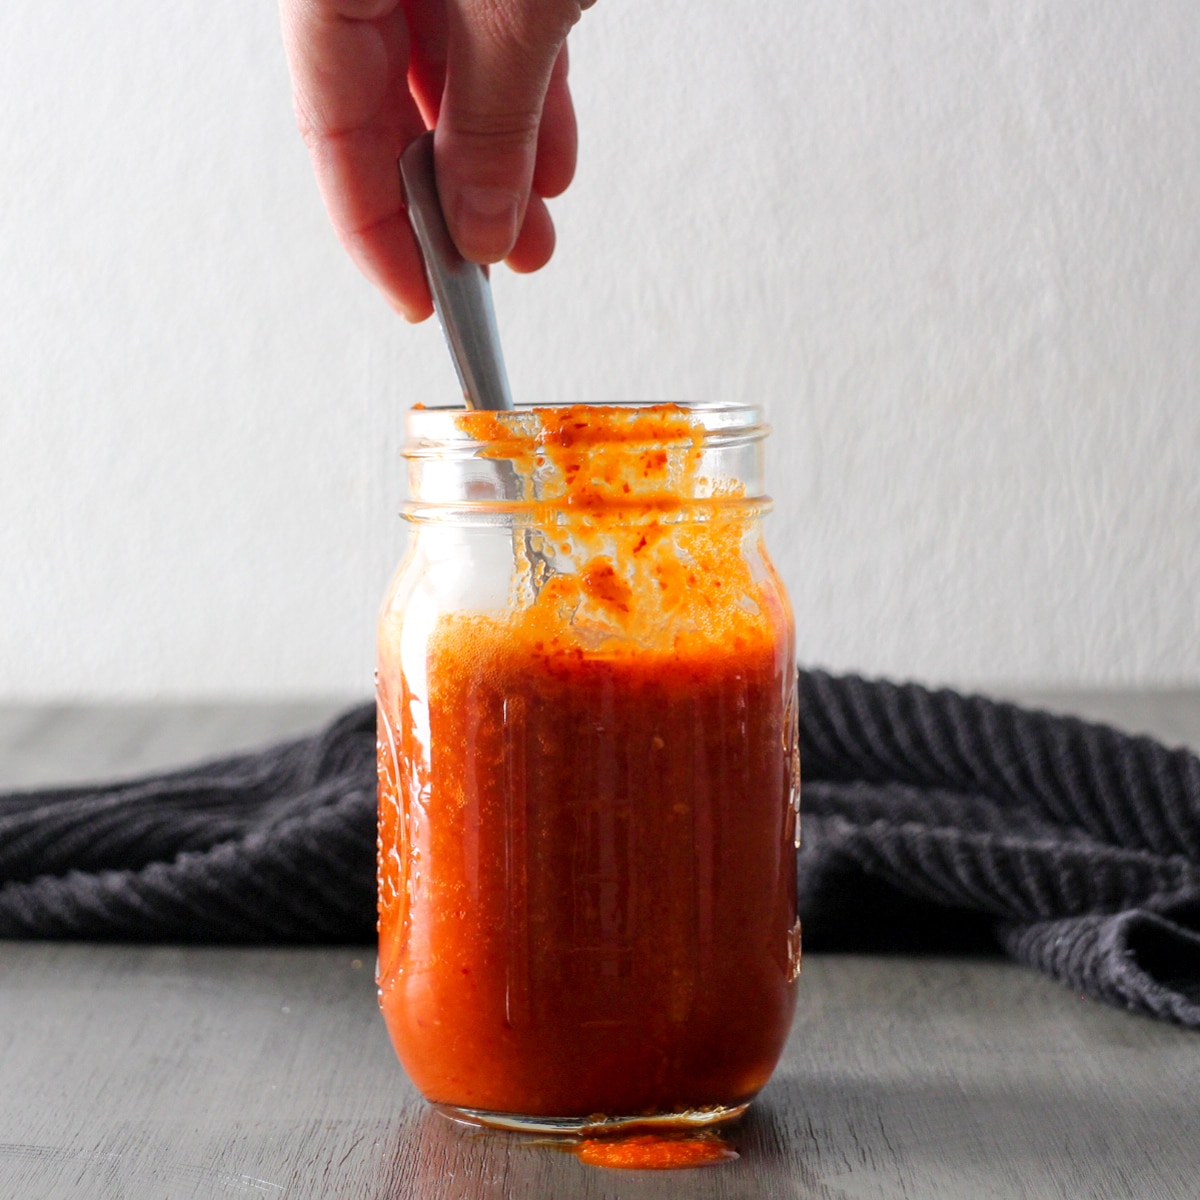 How to make hot sauce from dried peppers